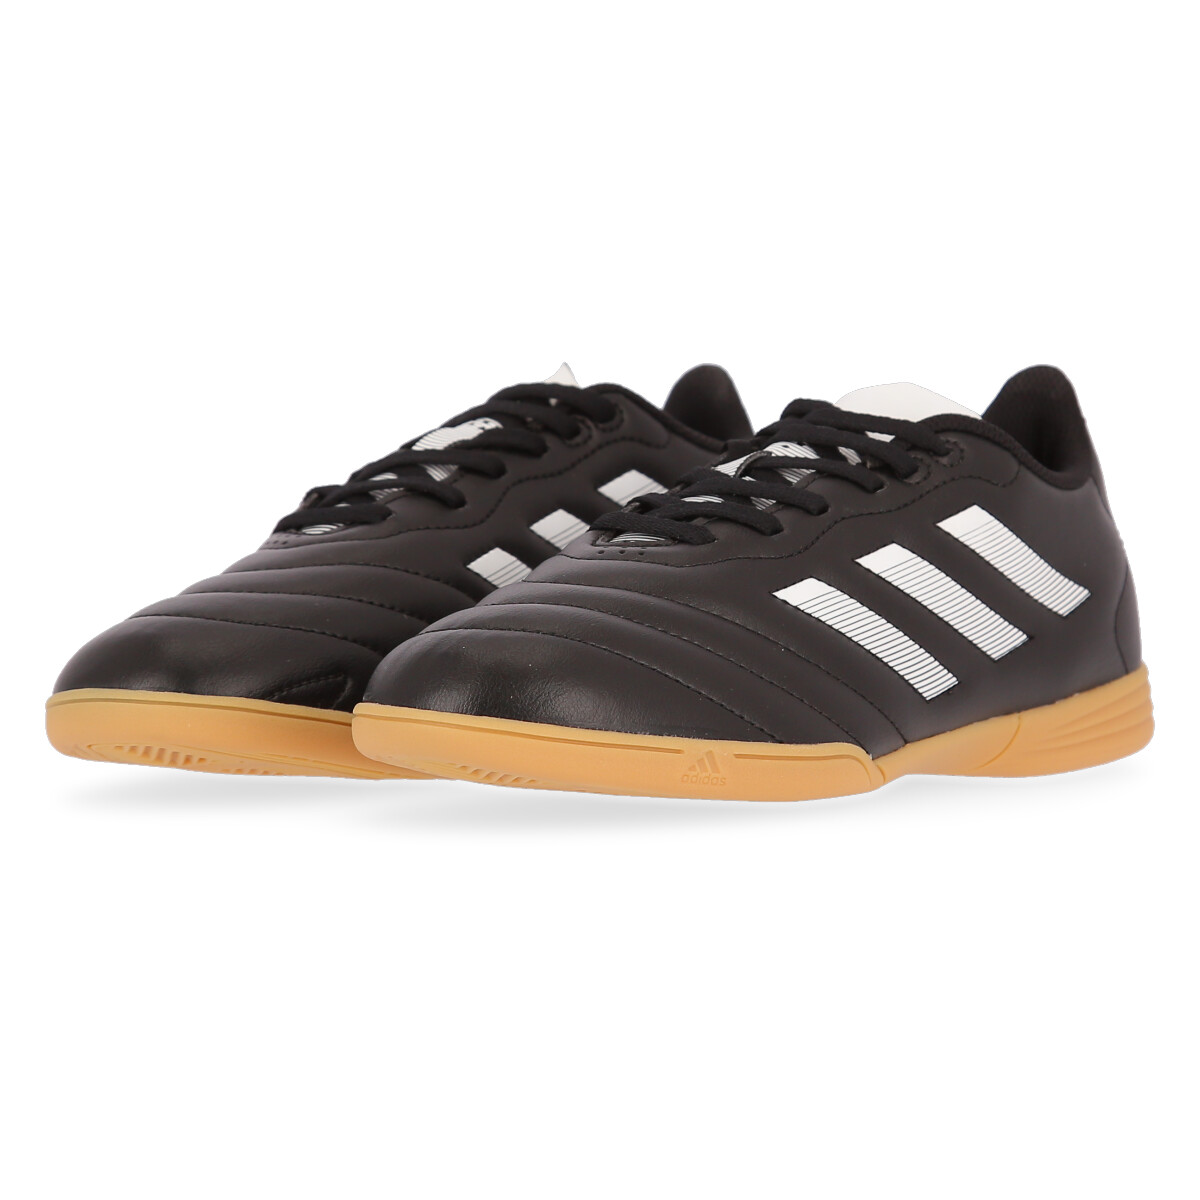 Botines adidas Goletto Viii In,  image number null